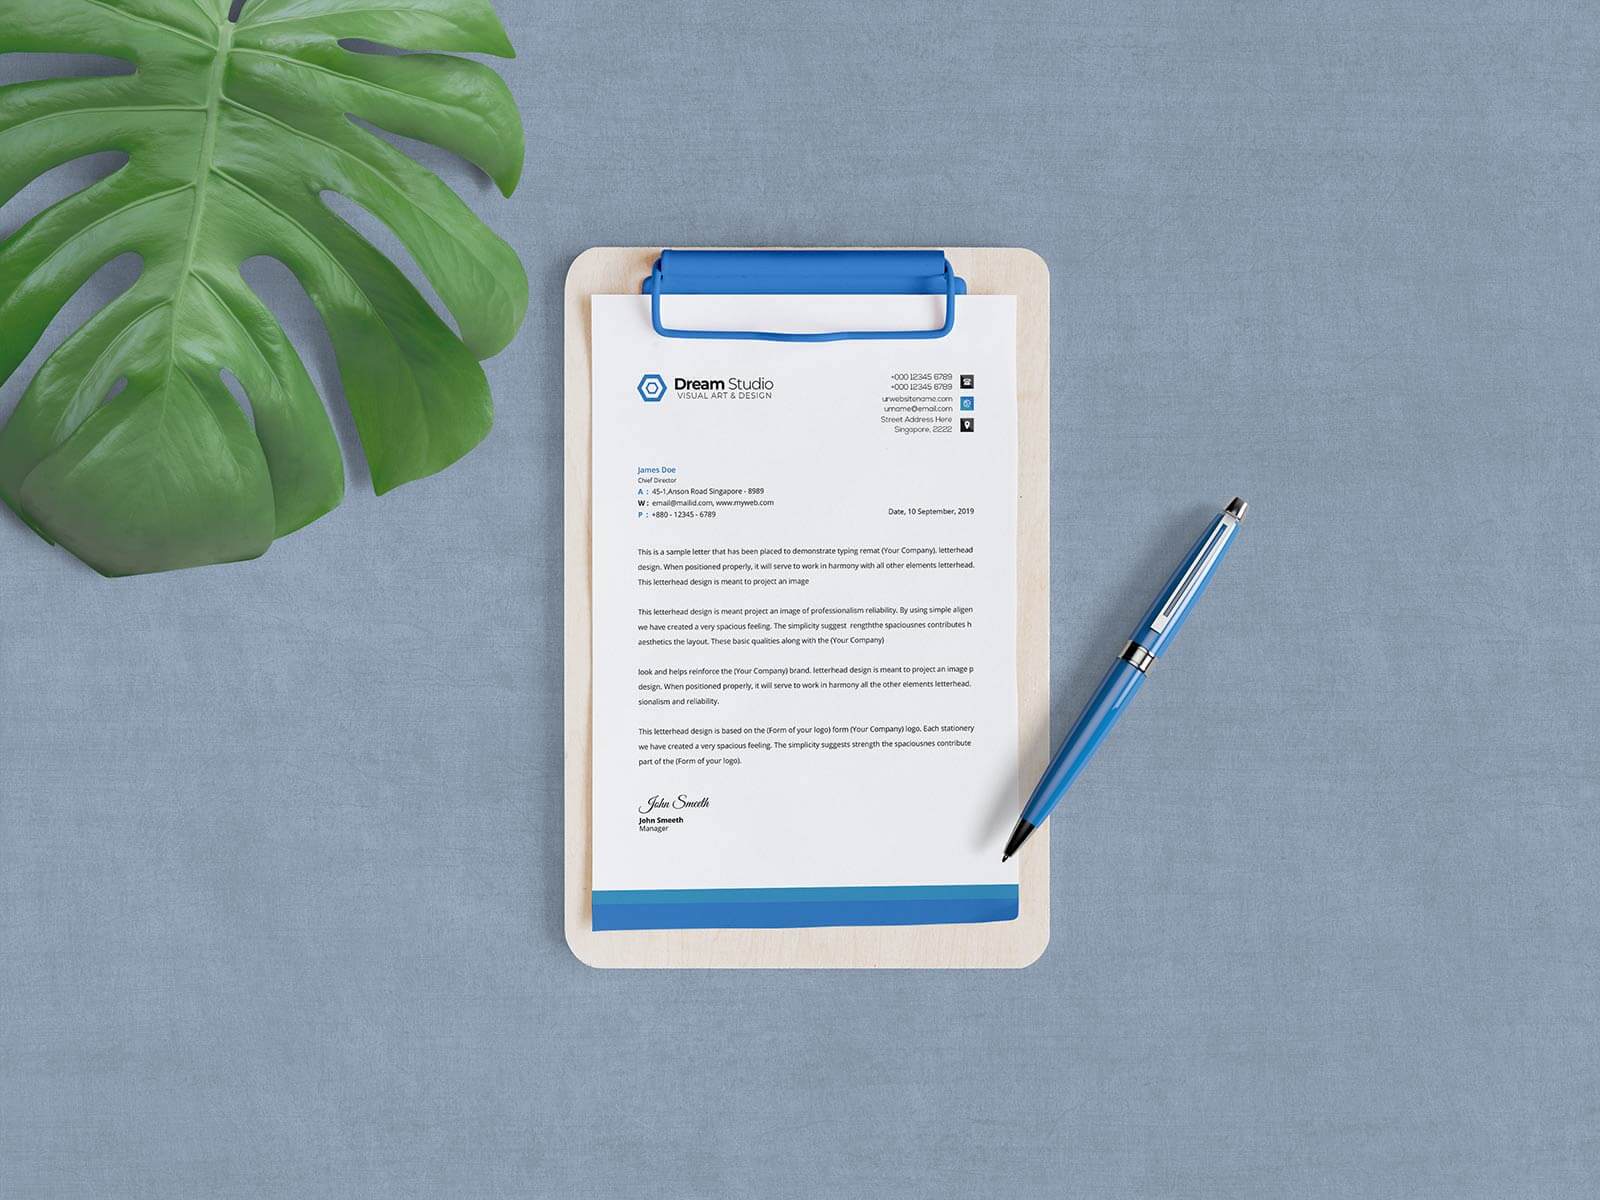 Free-A4-Size-Clipboard-Mockup-PSD-for-Official-Documents.-File